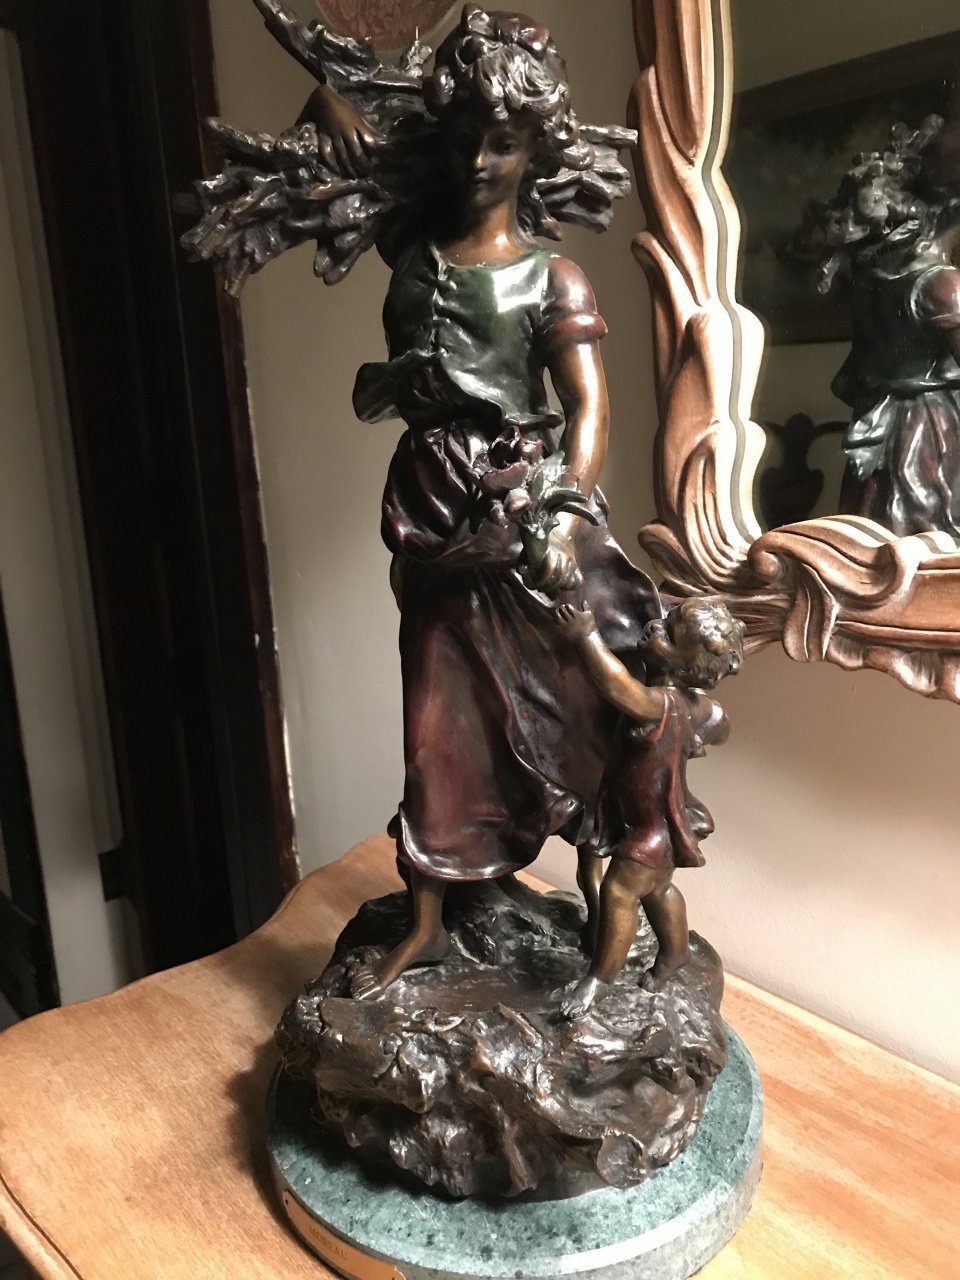 I Have A Bronze Sculpture Of A Woman And Child On A Marble Base. She Is